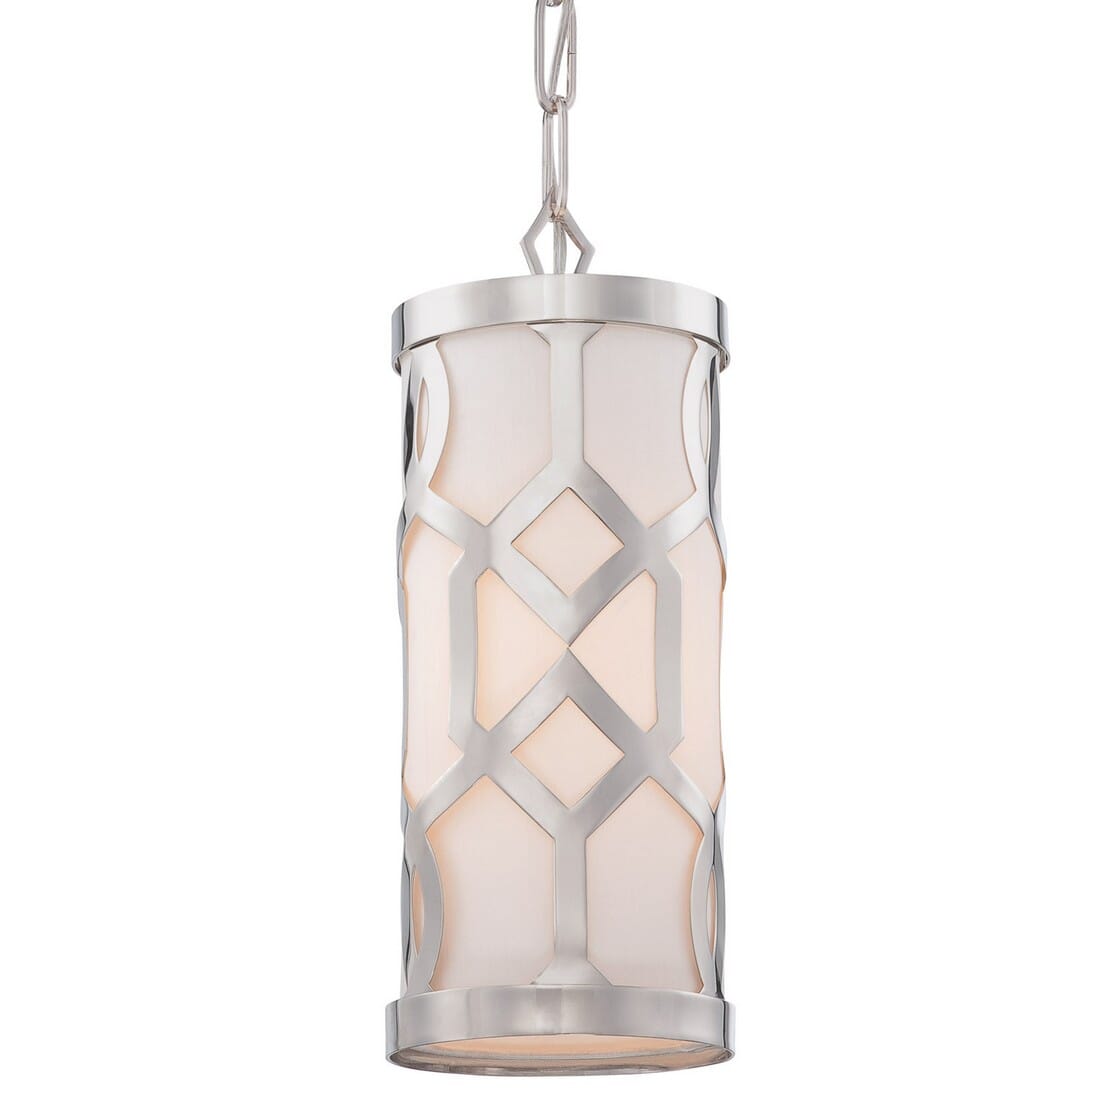 Libby Langdon for Jennings 14.25" Pendant in Polished Nickel